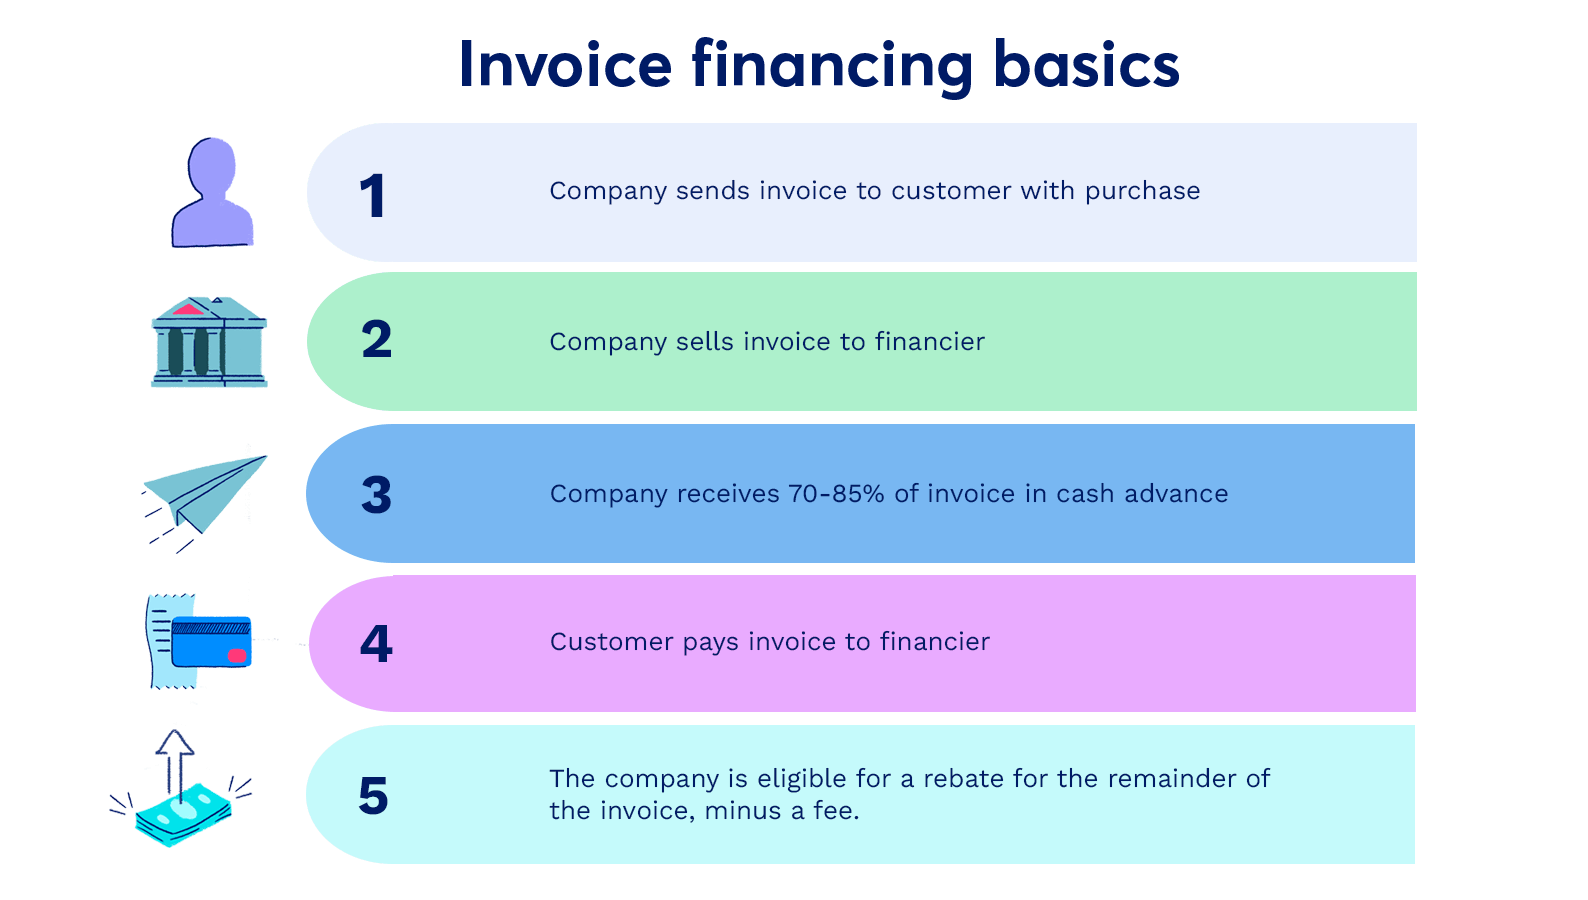 The title says “Invoice financing basics.” 1. Company sends invoice to customer with purchase. 2. Company sells invoice to financier 3. Company receives 70-85% if invoice in cash advance. 4. Customer pays invoice to financier. 5. The company is eligible for a rebate for the remainder of the voice, minus a fee.